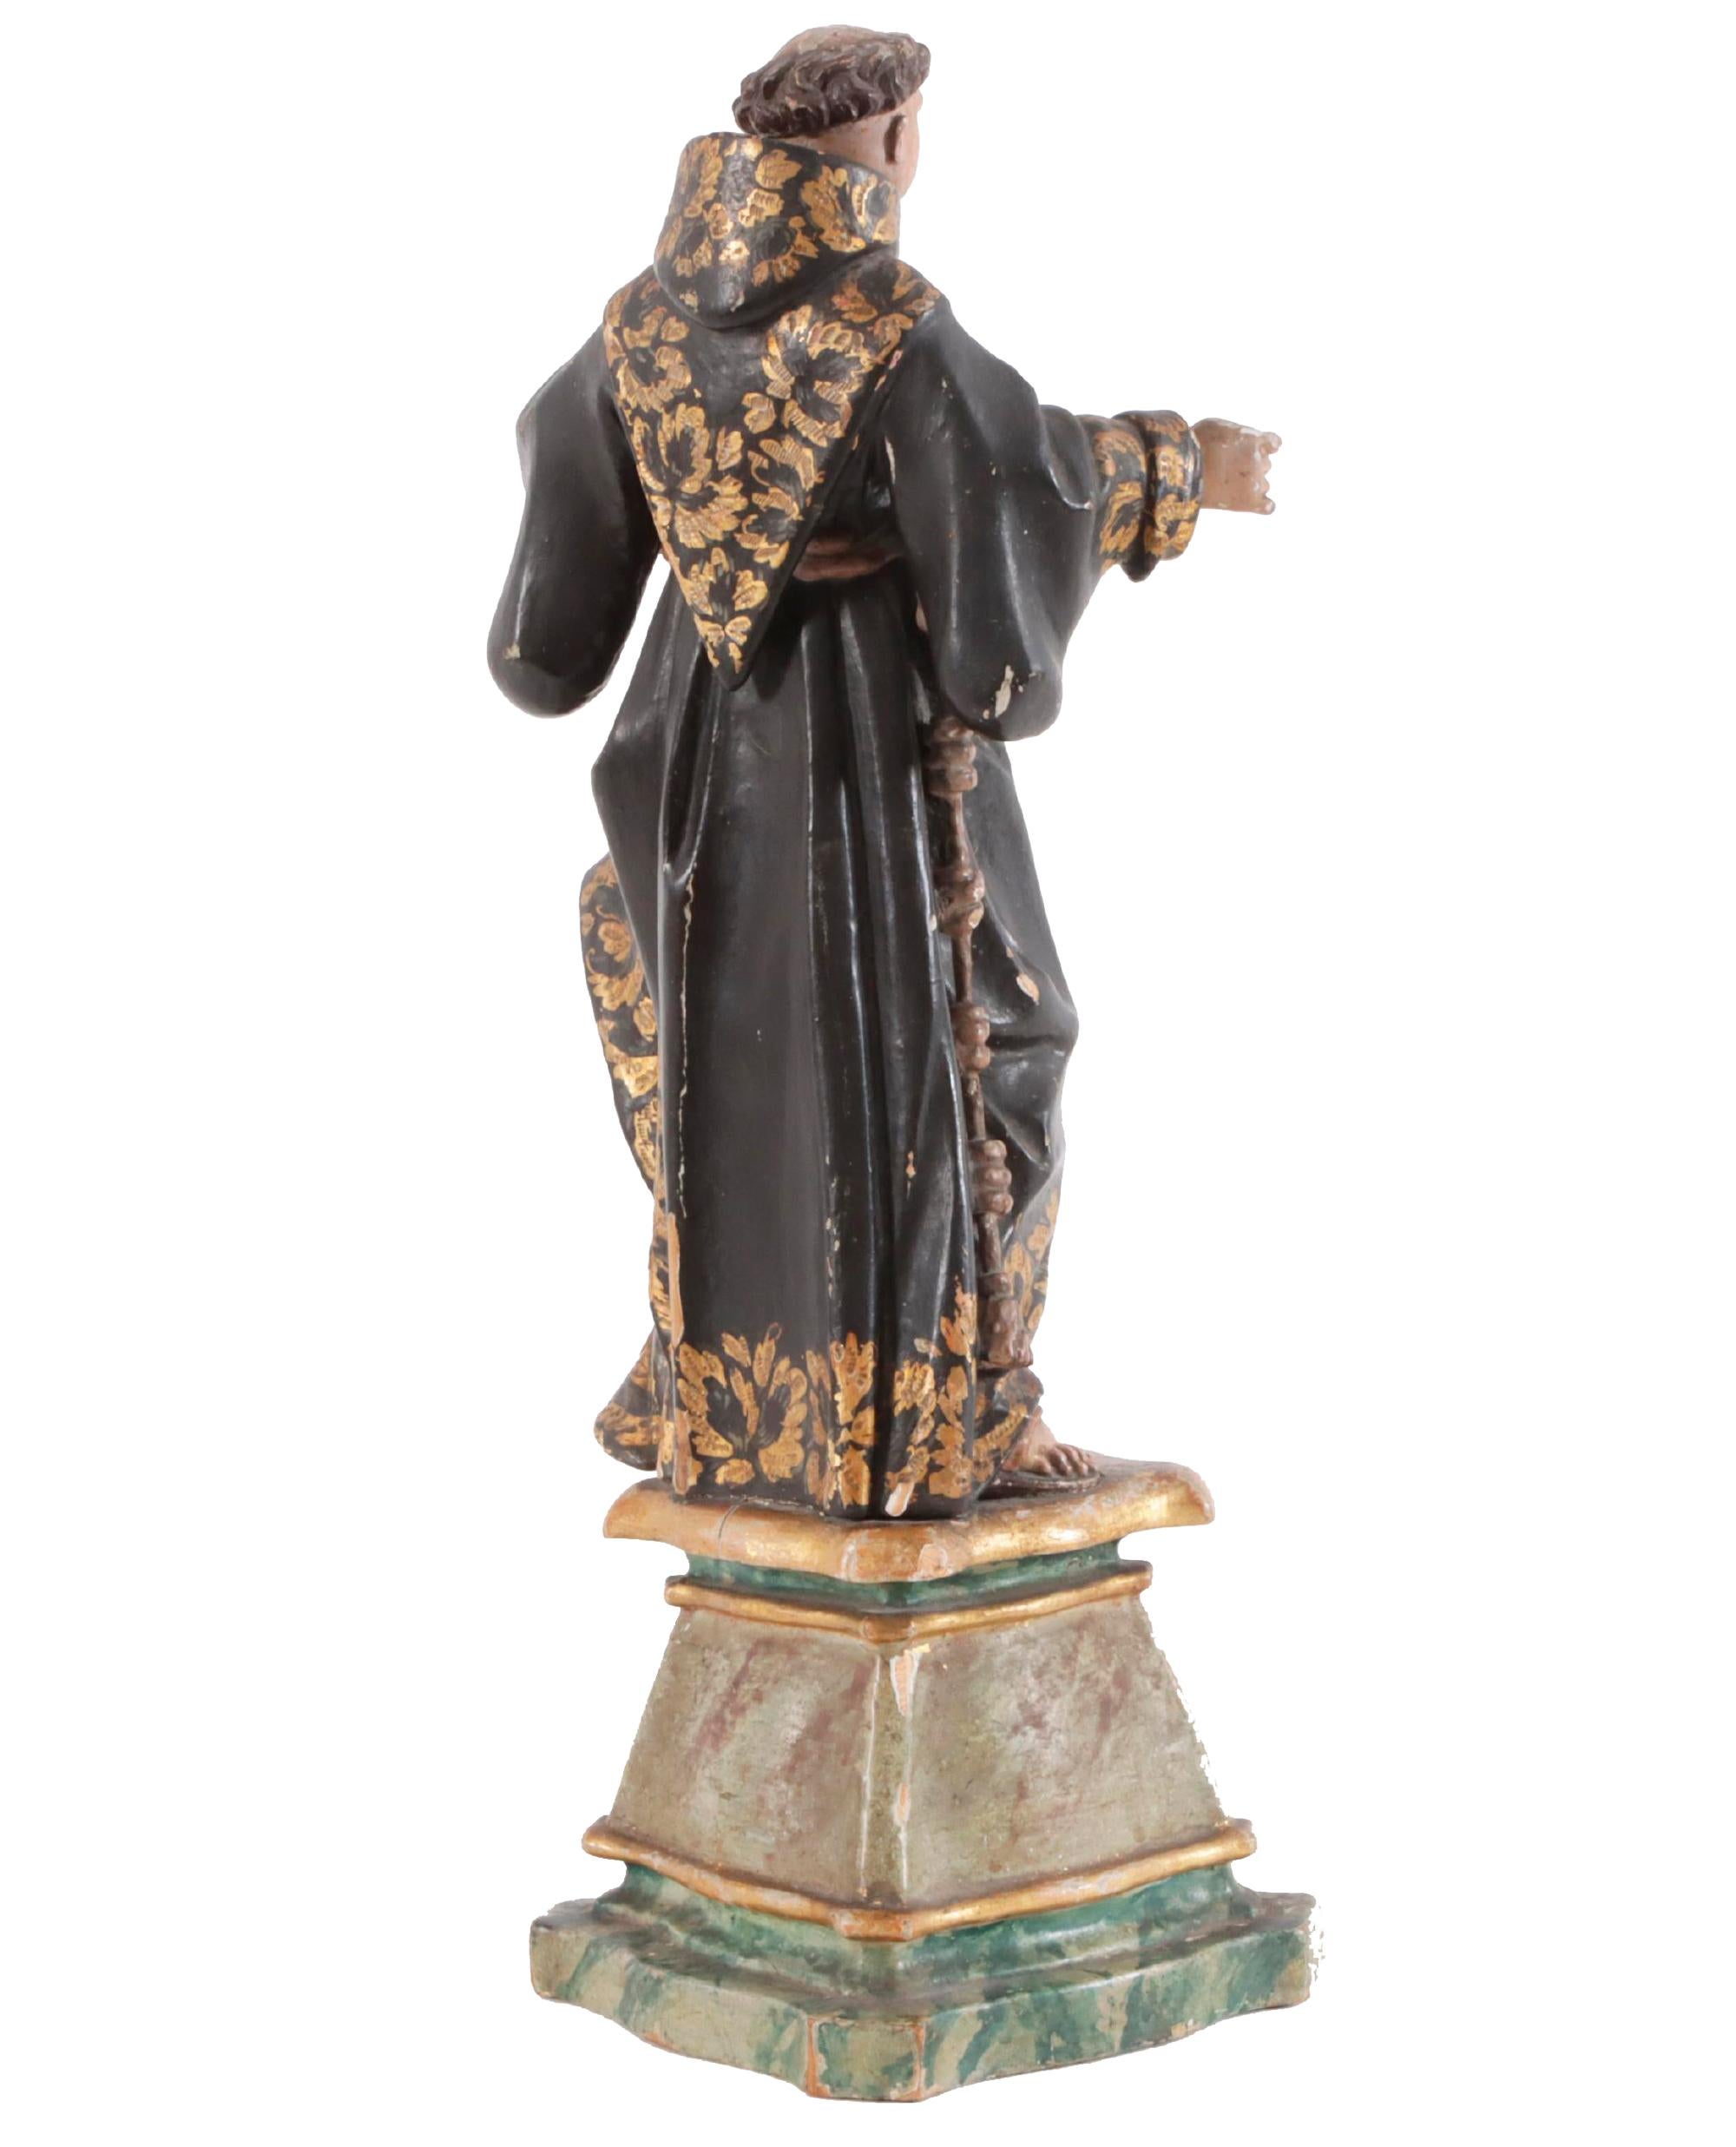 Carved and painted wood sculpture of a preaching monk, Spanish school, early 18th century. The sculpture features a monk situated on a piedestal wearing traditional cassock and sandals whilst holding the holy book. This monk can be seen in a larger